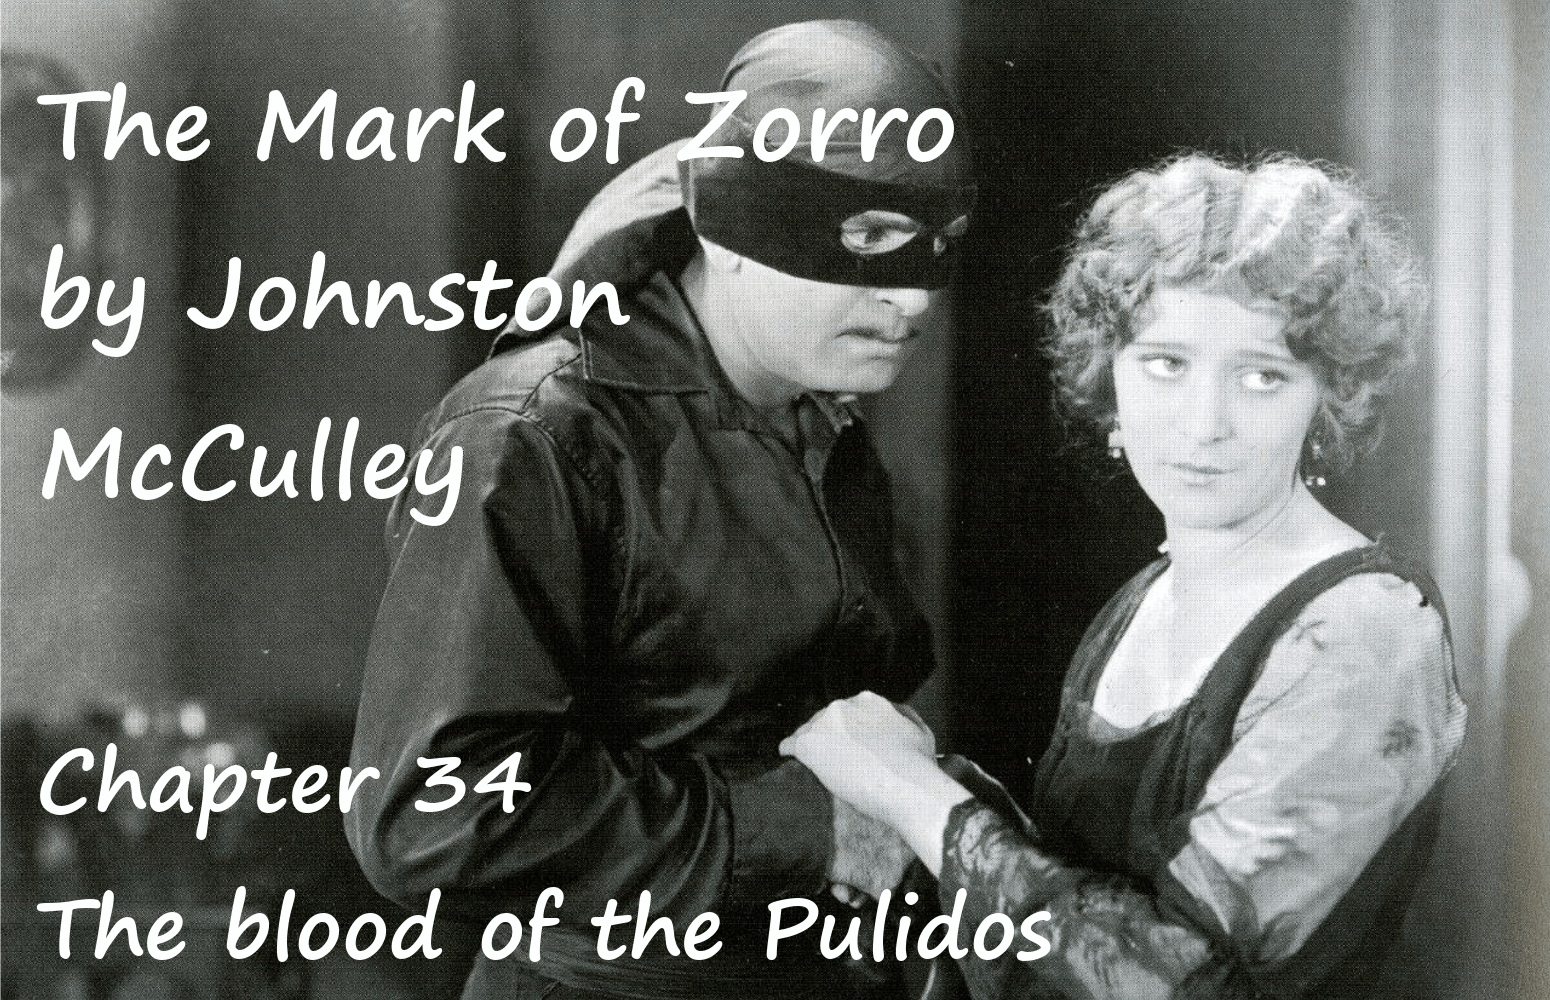 The Mark of Zorro chapter 34 The blood of the Pulidos by Johnston McCulley